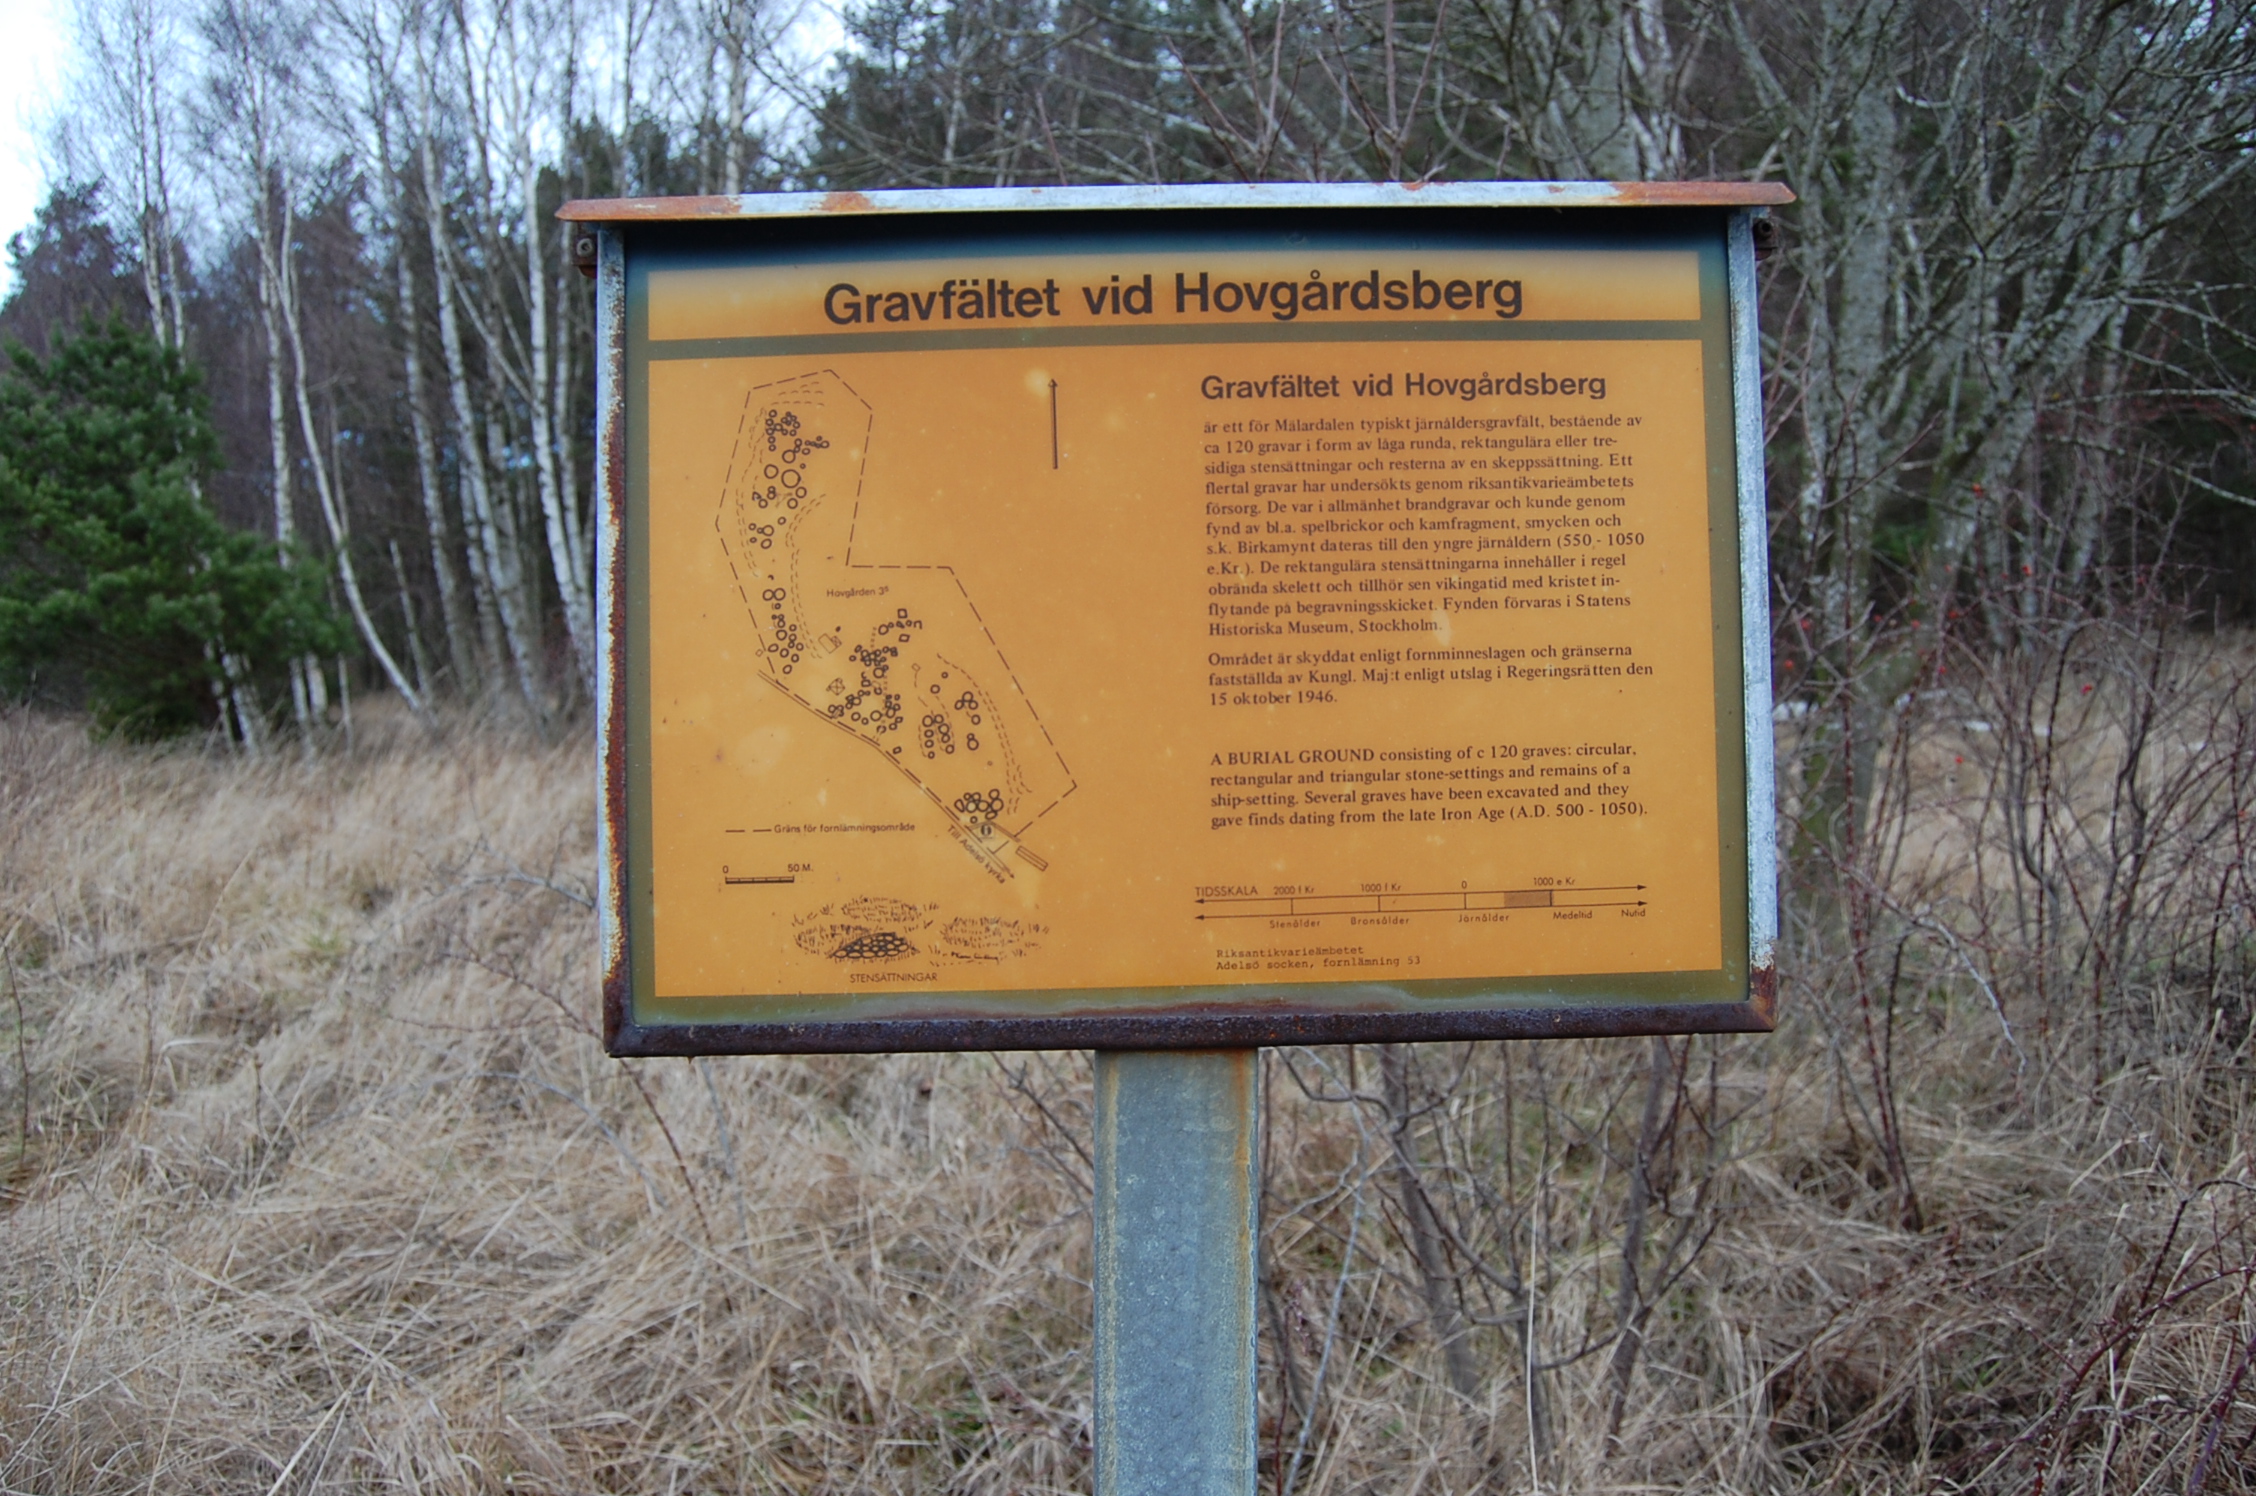 a sign in a forest indicating directions to various places